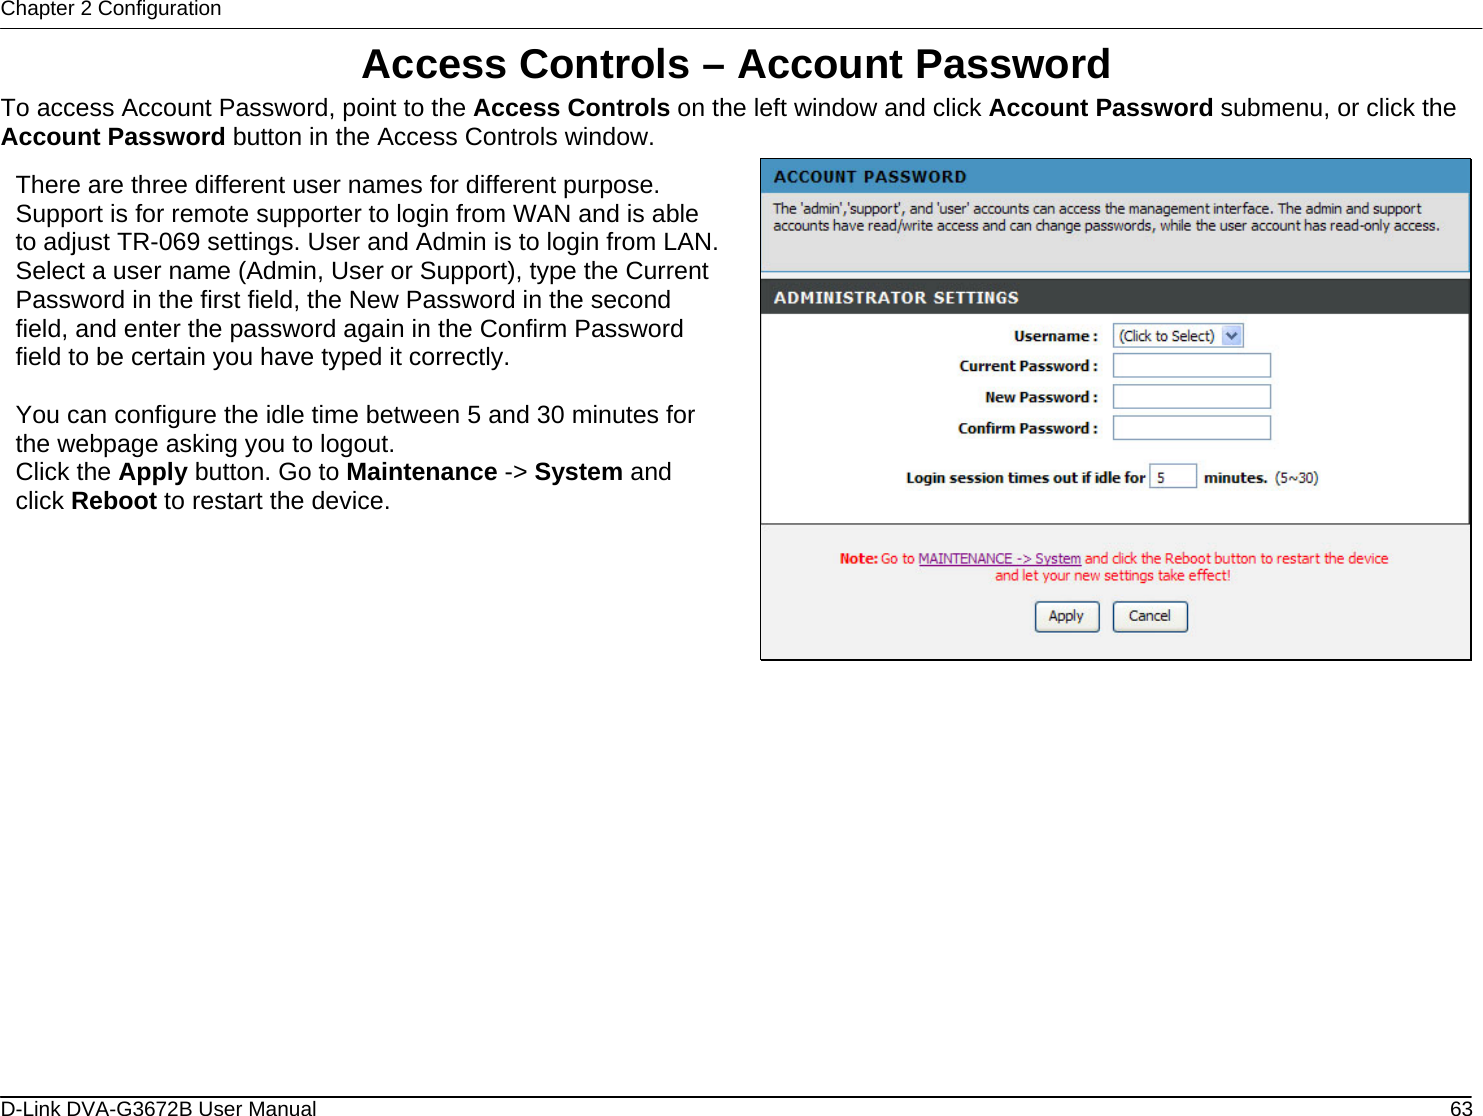 Chapter 2 Configuration Access Controls – Account Password To access Account Password, point to the Access Controls on the left window and click Account Password submenu, or click the Account Password button in the Access Controls window.  There are three different user names for different purpose. Support is for remote supporter to login from WAN and is able to adjust TR-069 settings. User and Admin is to login from LAN. Select a user name (Admin, User or Support), type the Current Password in the first field, the New Password in the second field, and enter the password again in the Confirm Password field to be certain you have typed it correctly.  You can configure the idle time between 5 and 30 minutes for the webpage asking you to logout. Click the Apply button. Go to Maintenance -&gt; System and click Reboot to restart the device.                D-Link DVA-G3672B User Manual  63